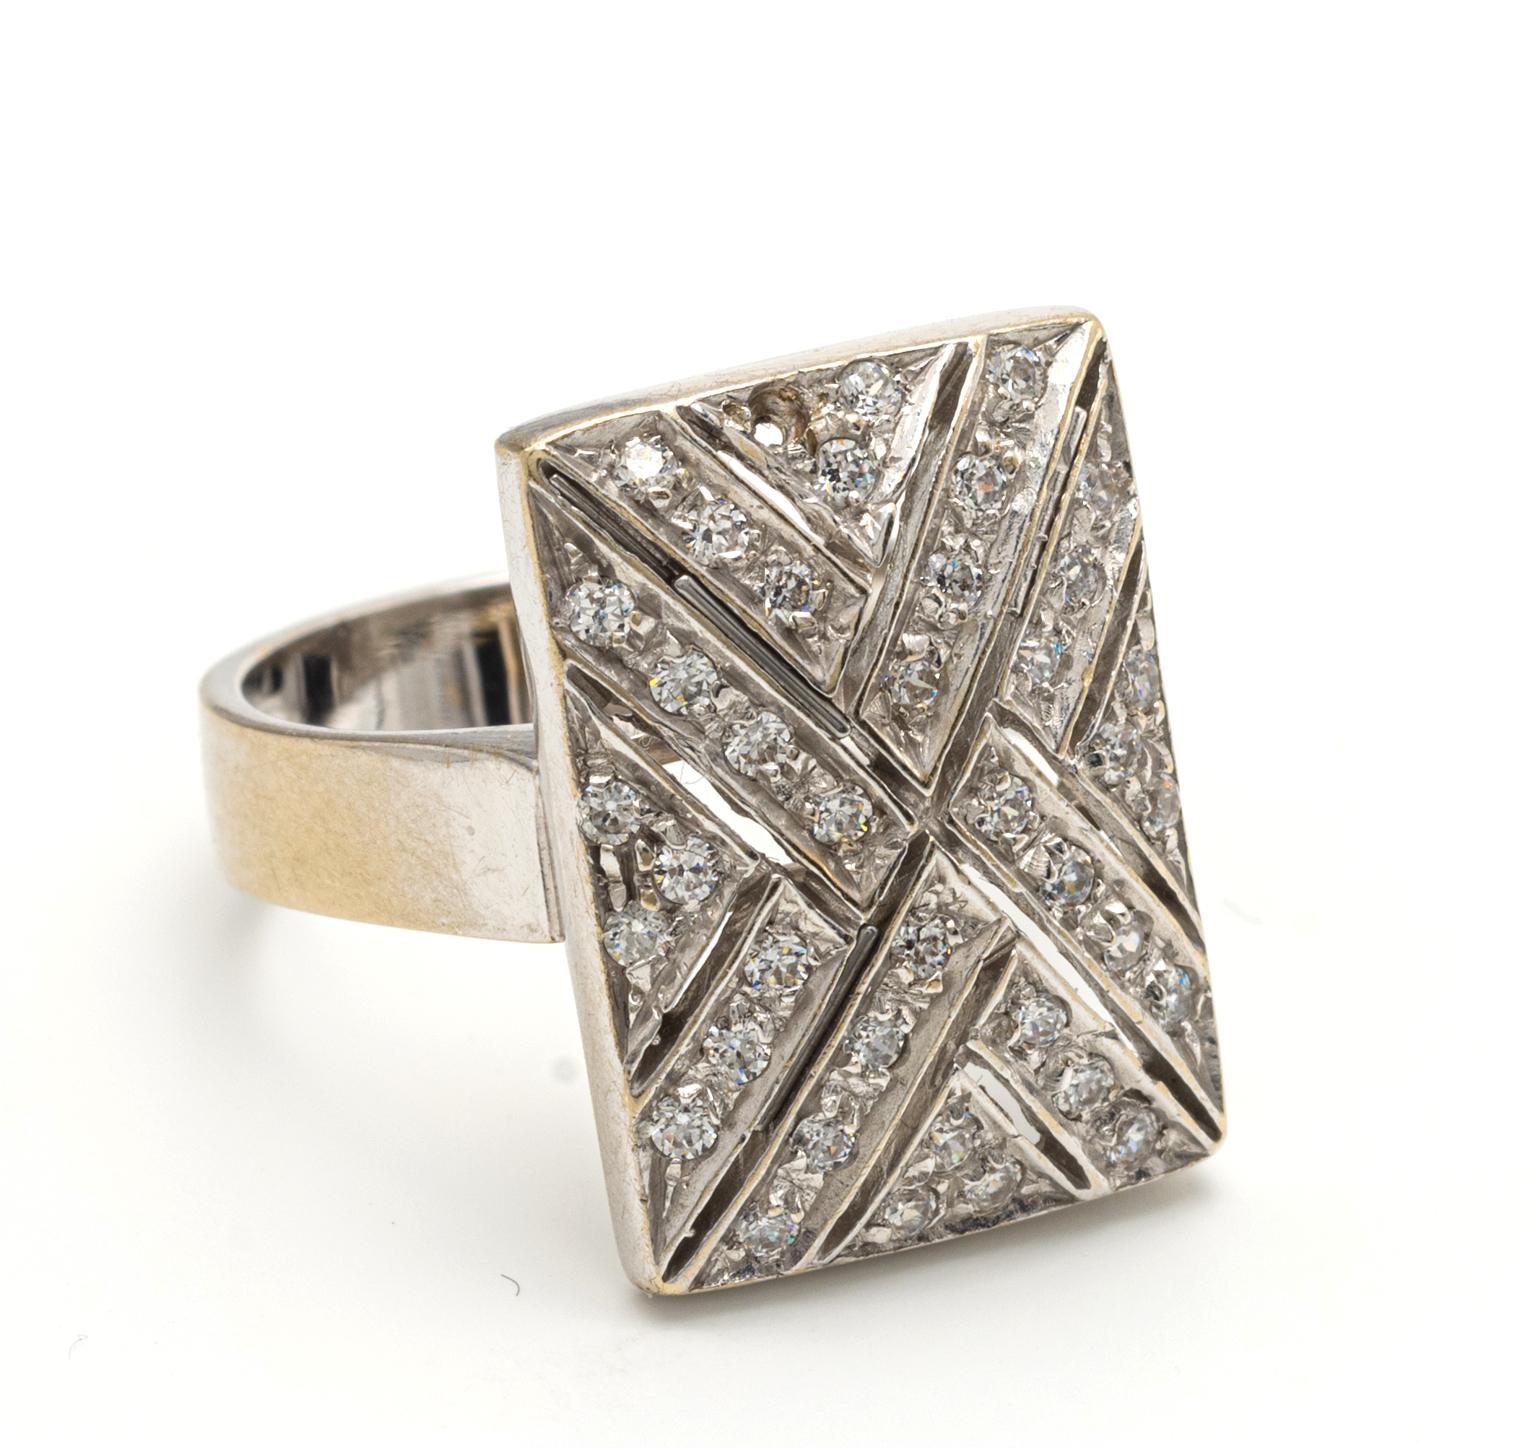 White Gold and Diamond Ring
Of rectangular design, set with a criss cross of round diamonds, Diamonds weighing a total of approximately 1.20 carat, 14 karat white gold, Size 7.